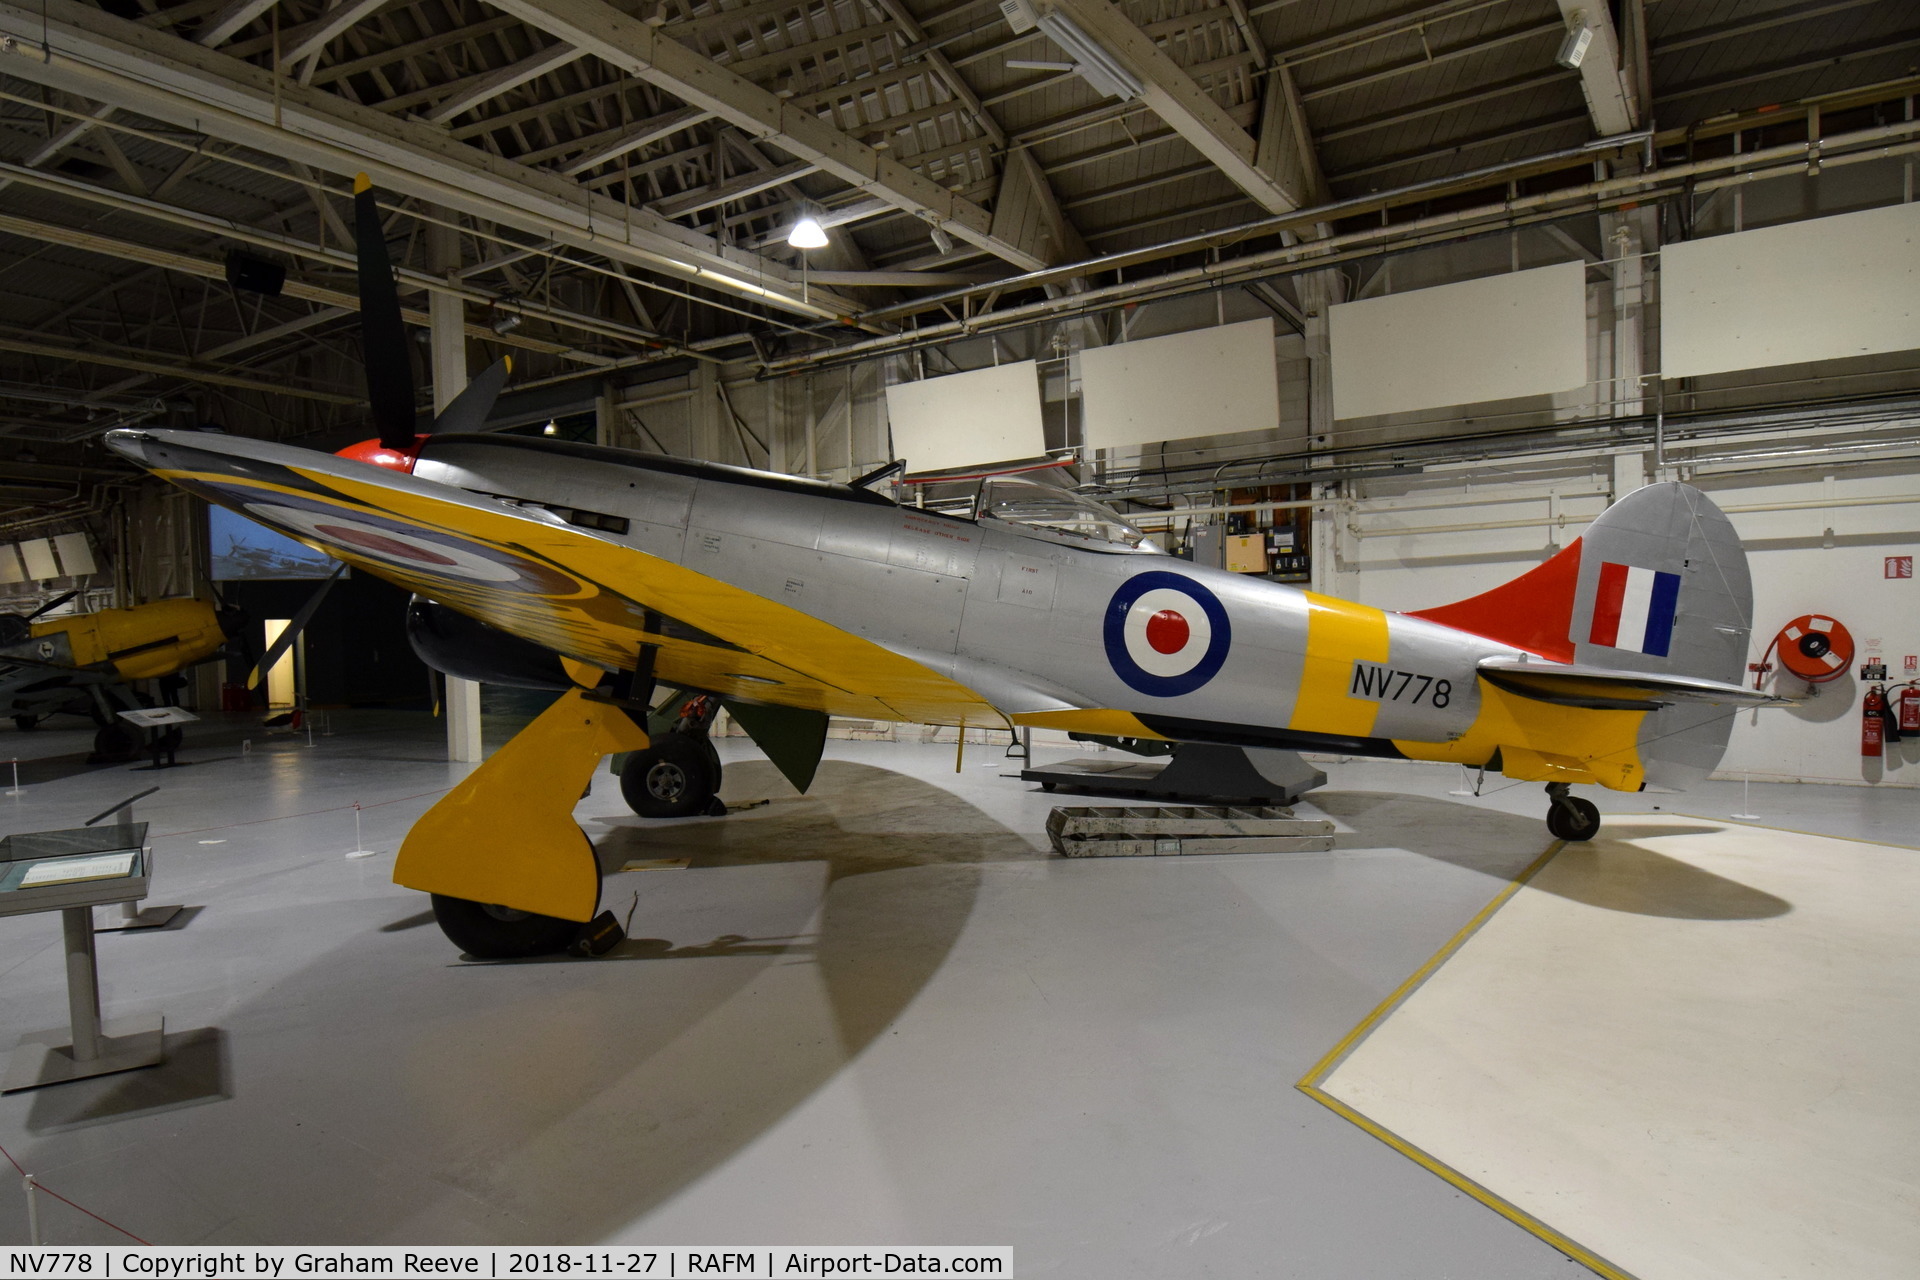 NV778, Hawker Tempest TT.5 C/N Not found NV778, On display at the RAF Museum, Hendon.